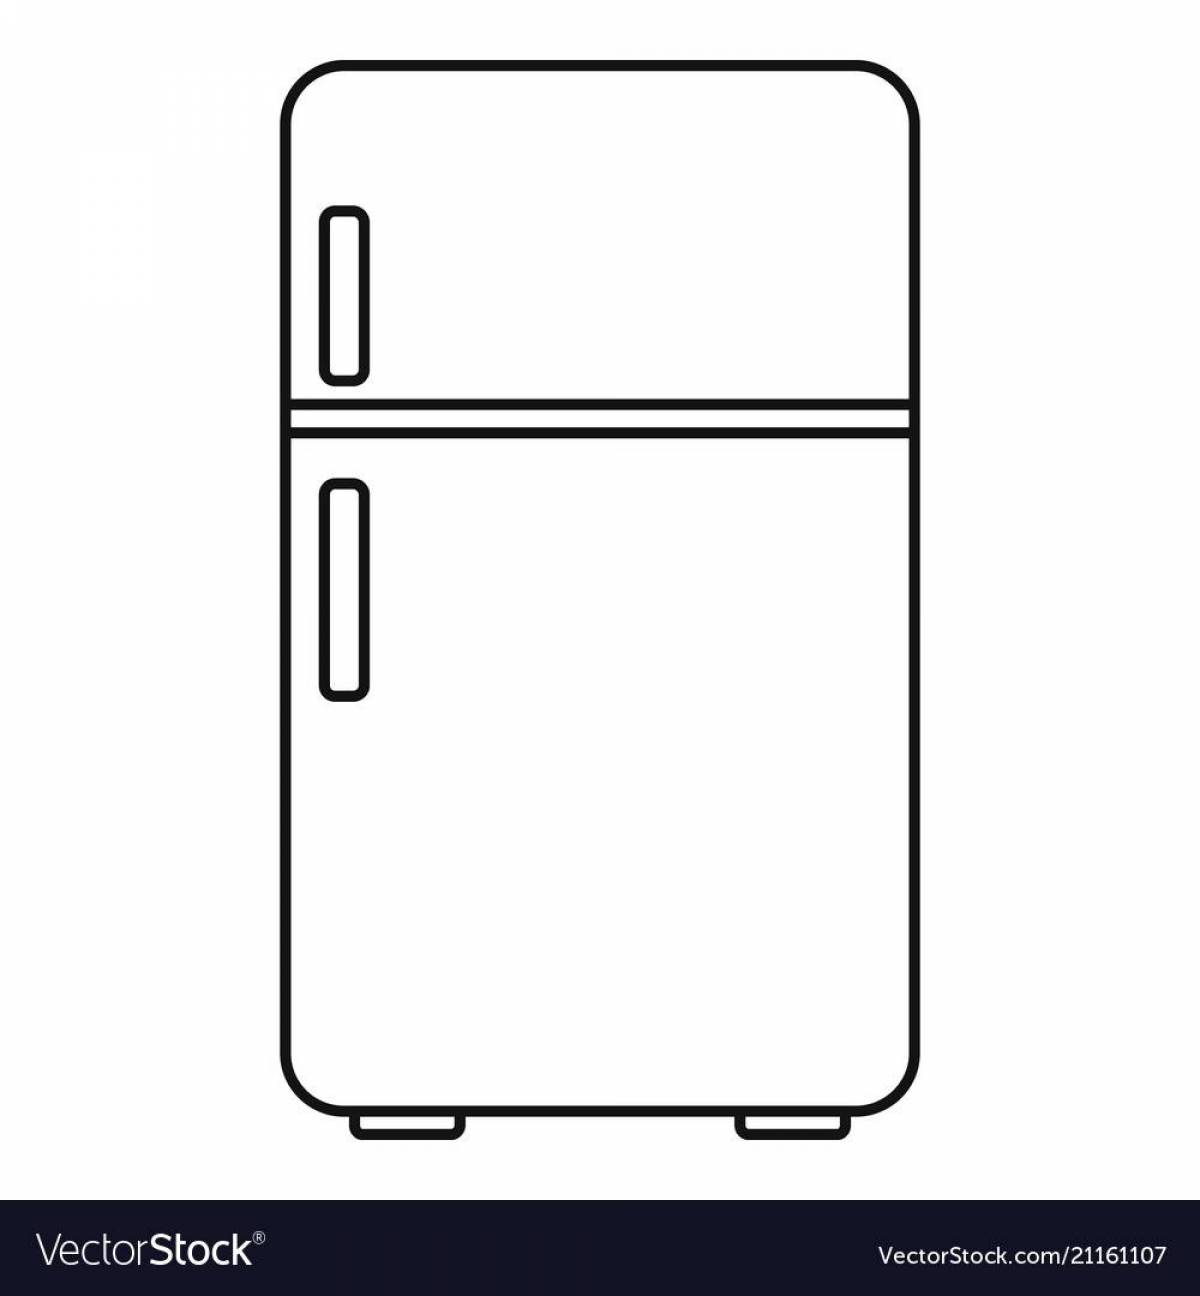 Playful refrigerator coloring page